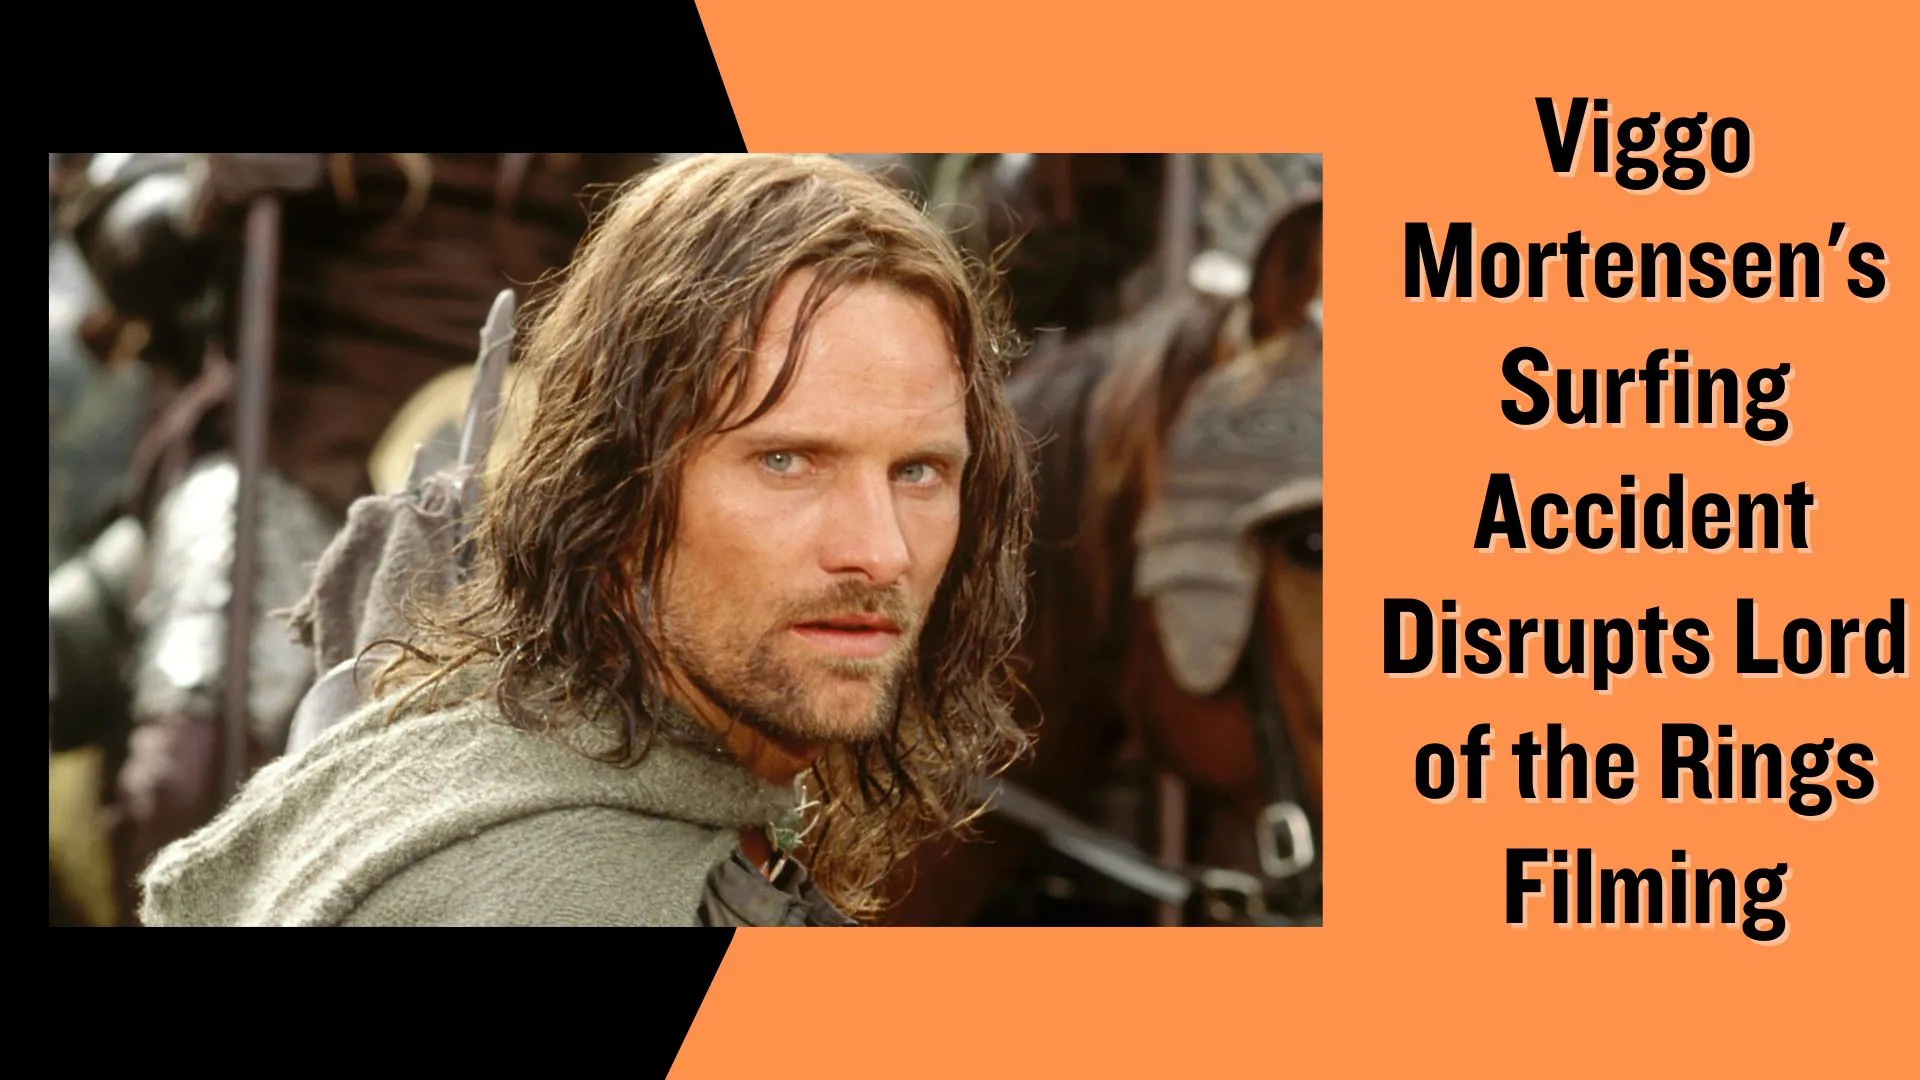 Viggo Mortensen's Surfing Accident Disrupts Lord of the Rings Filming